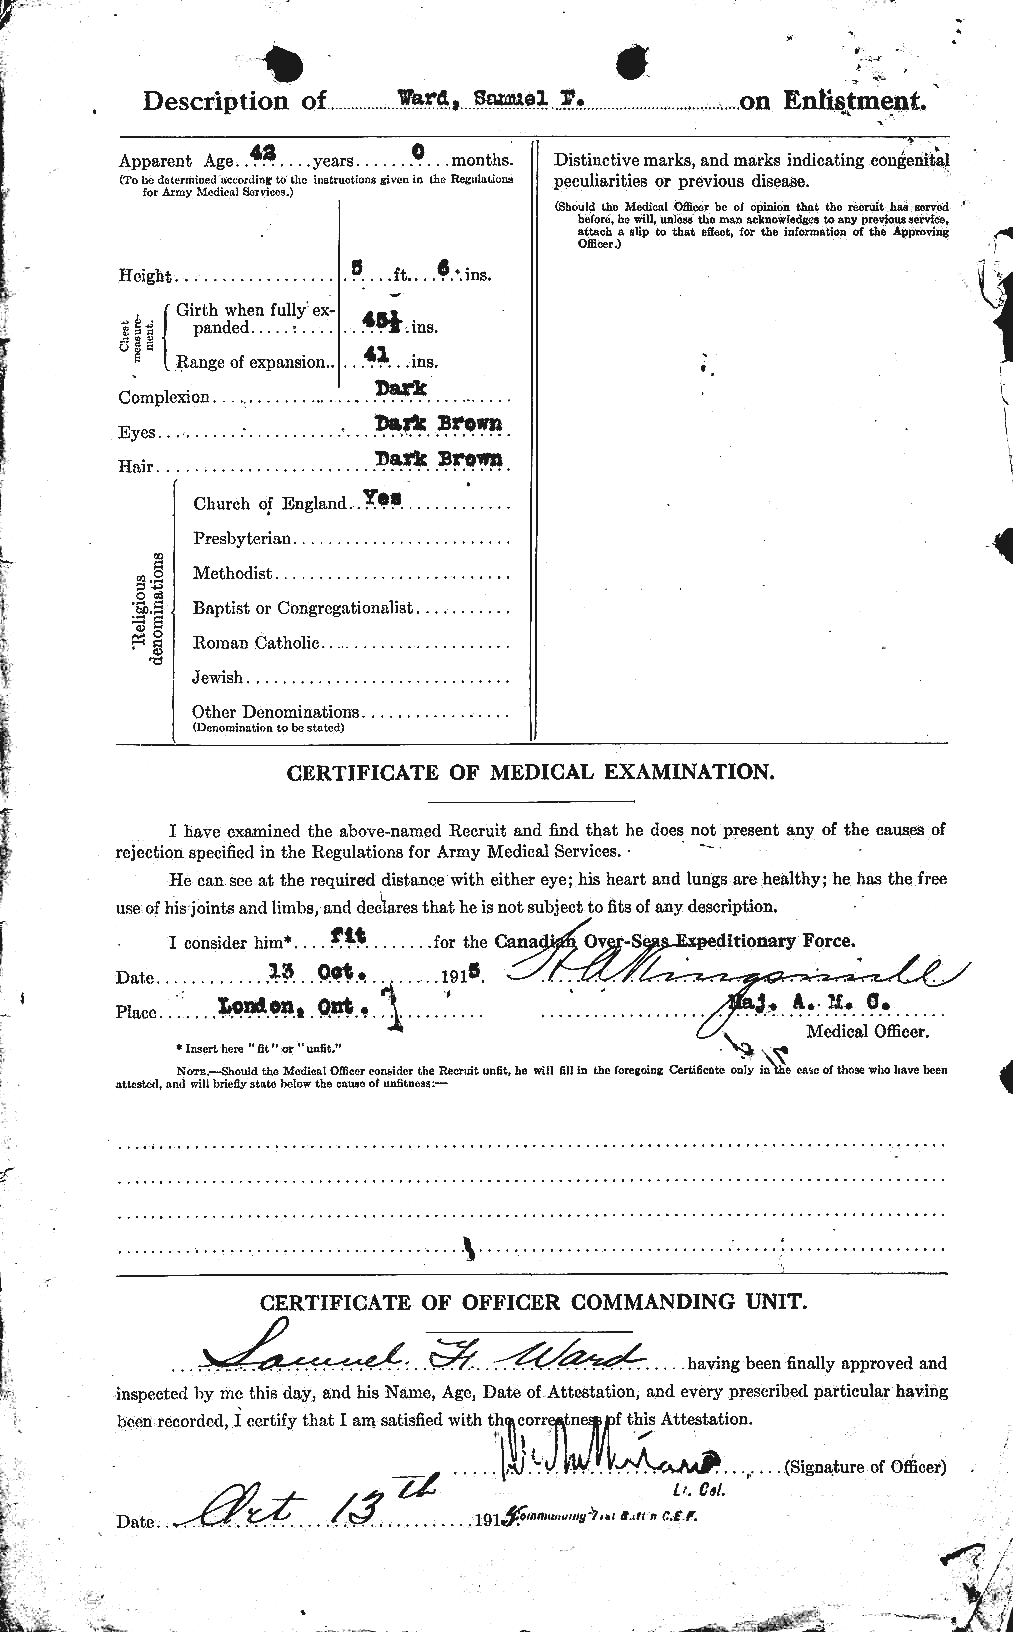 Personnel Records of the First World War - CEF 659682b